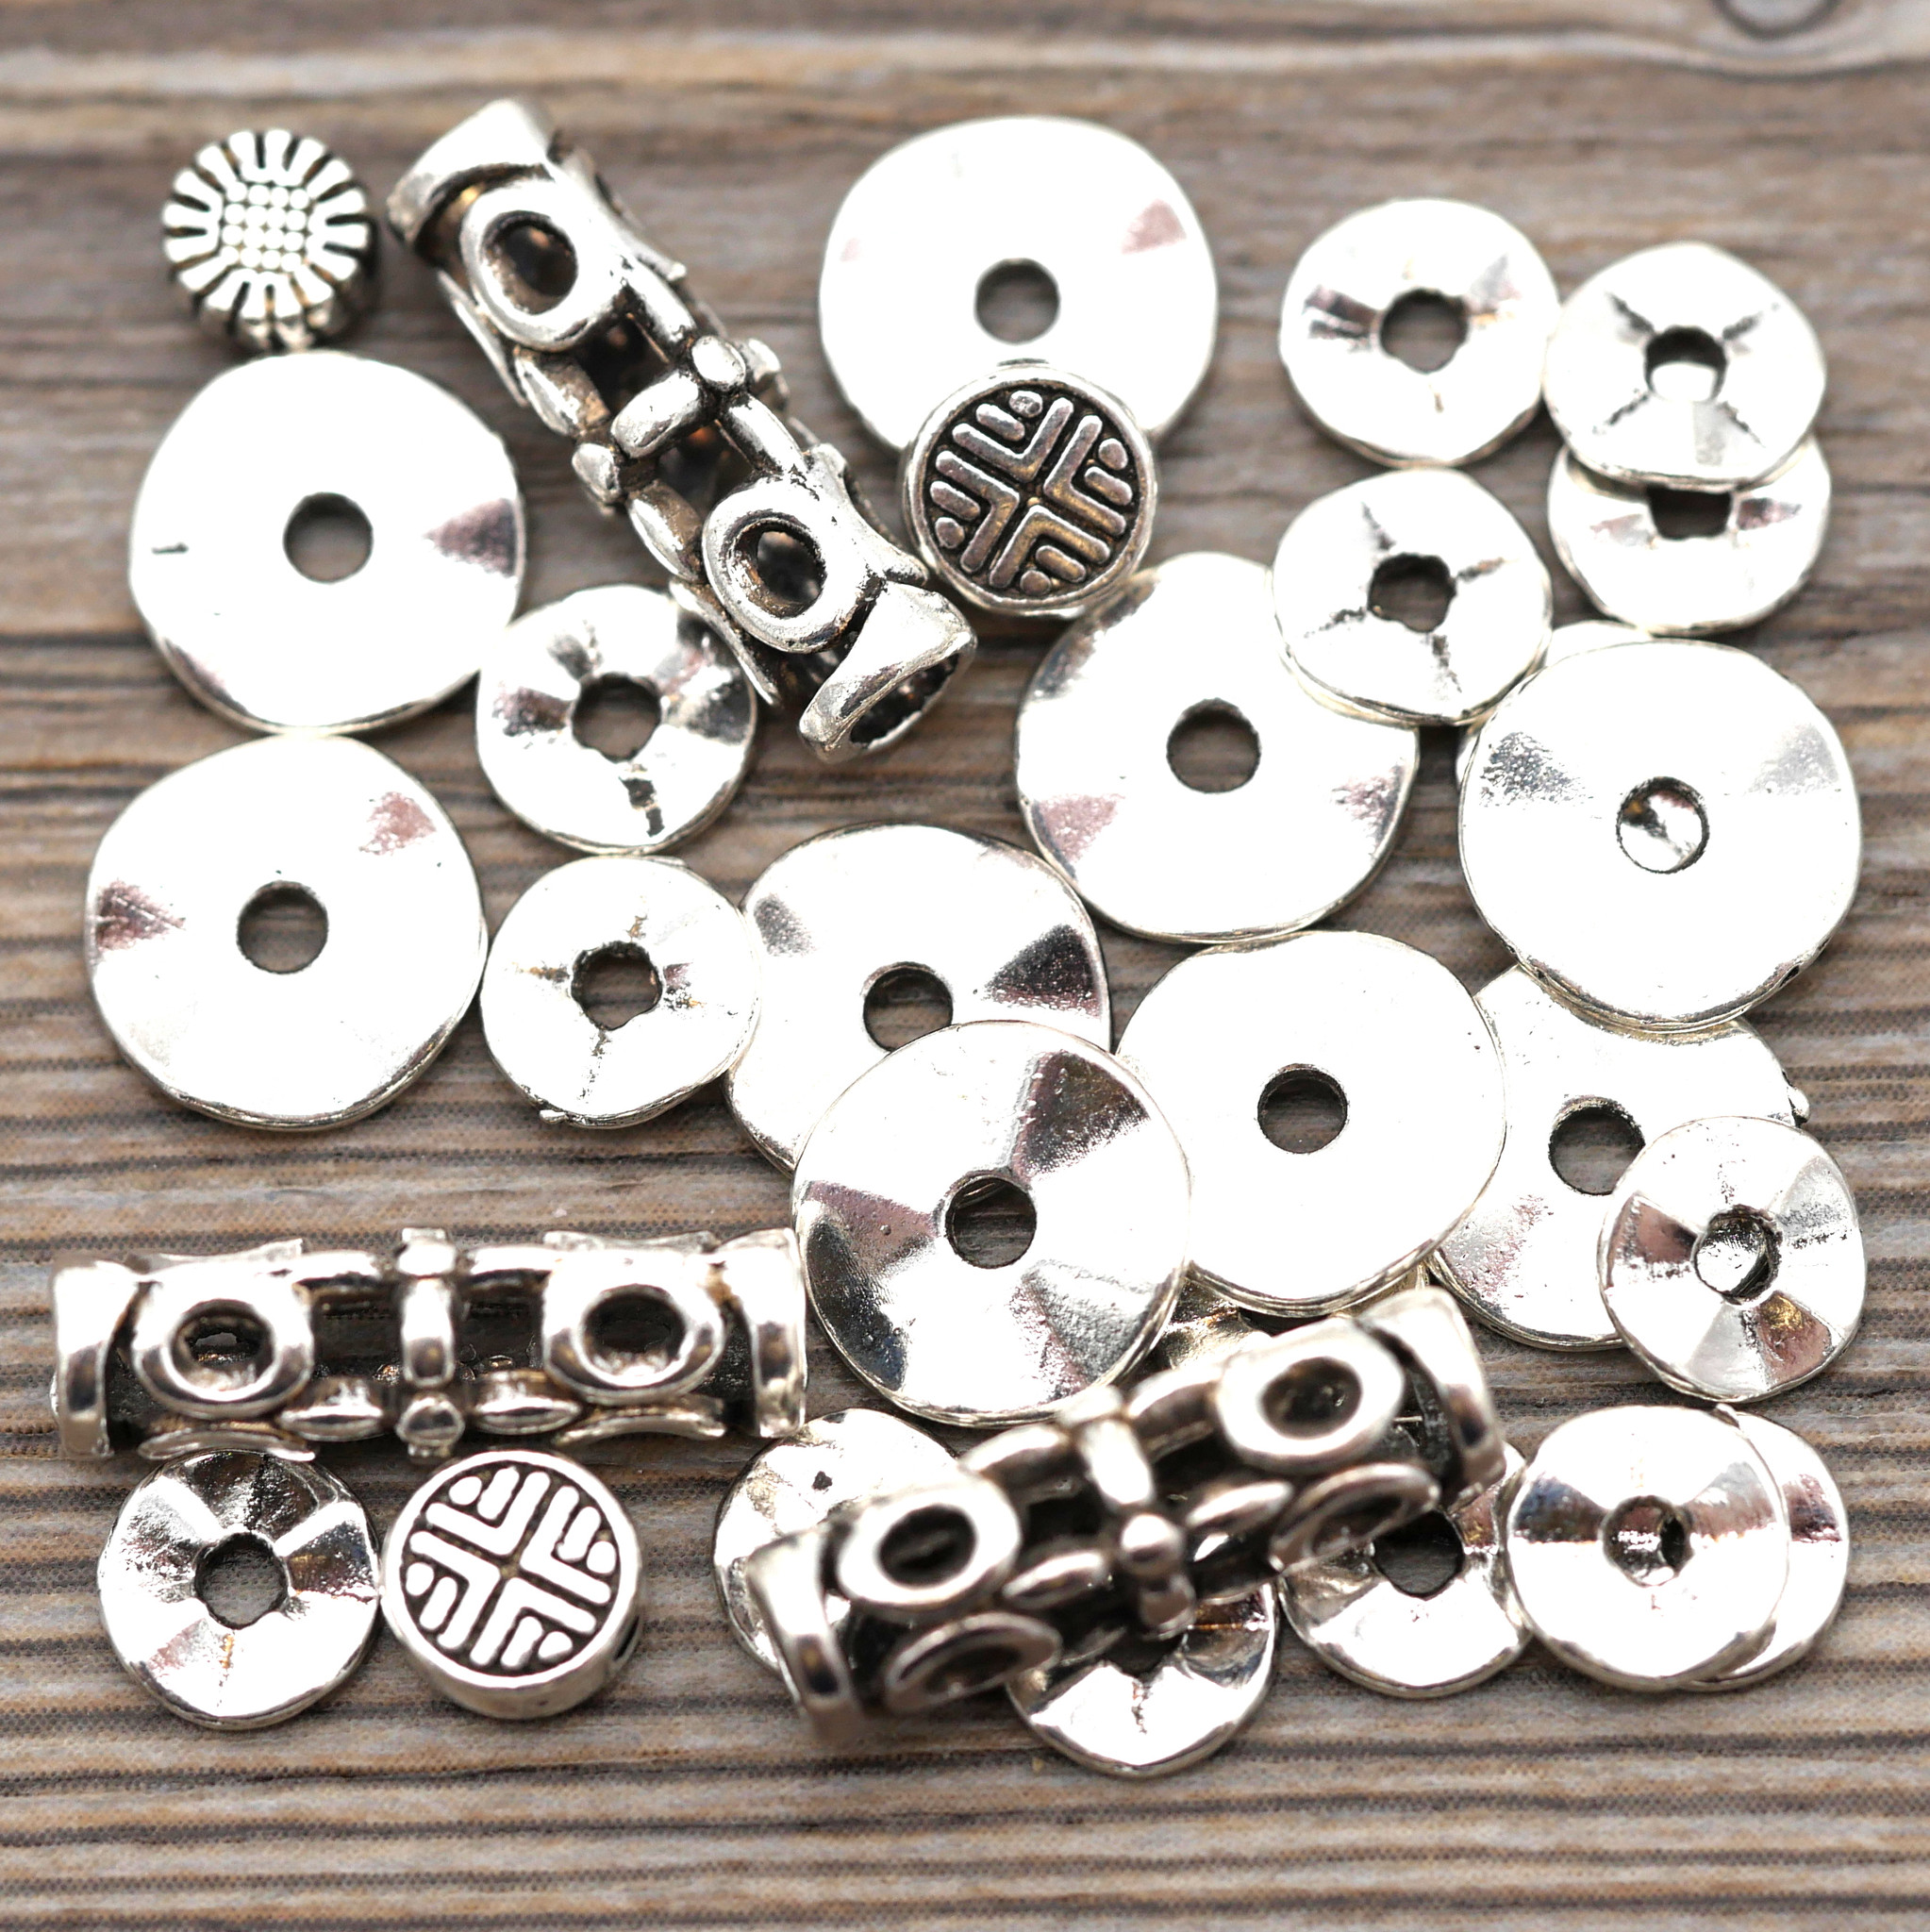 Silver Flat Metal Spacer Beads, Rondelle Spacer Beads